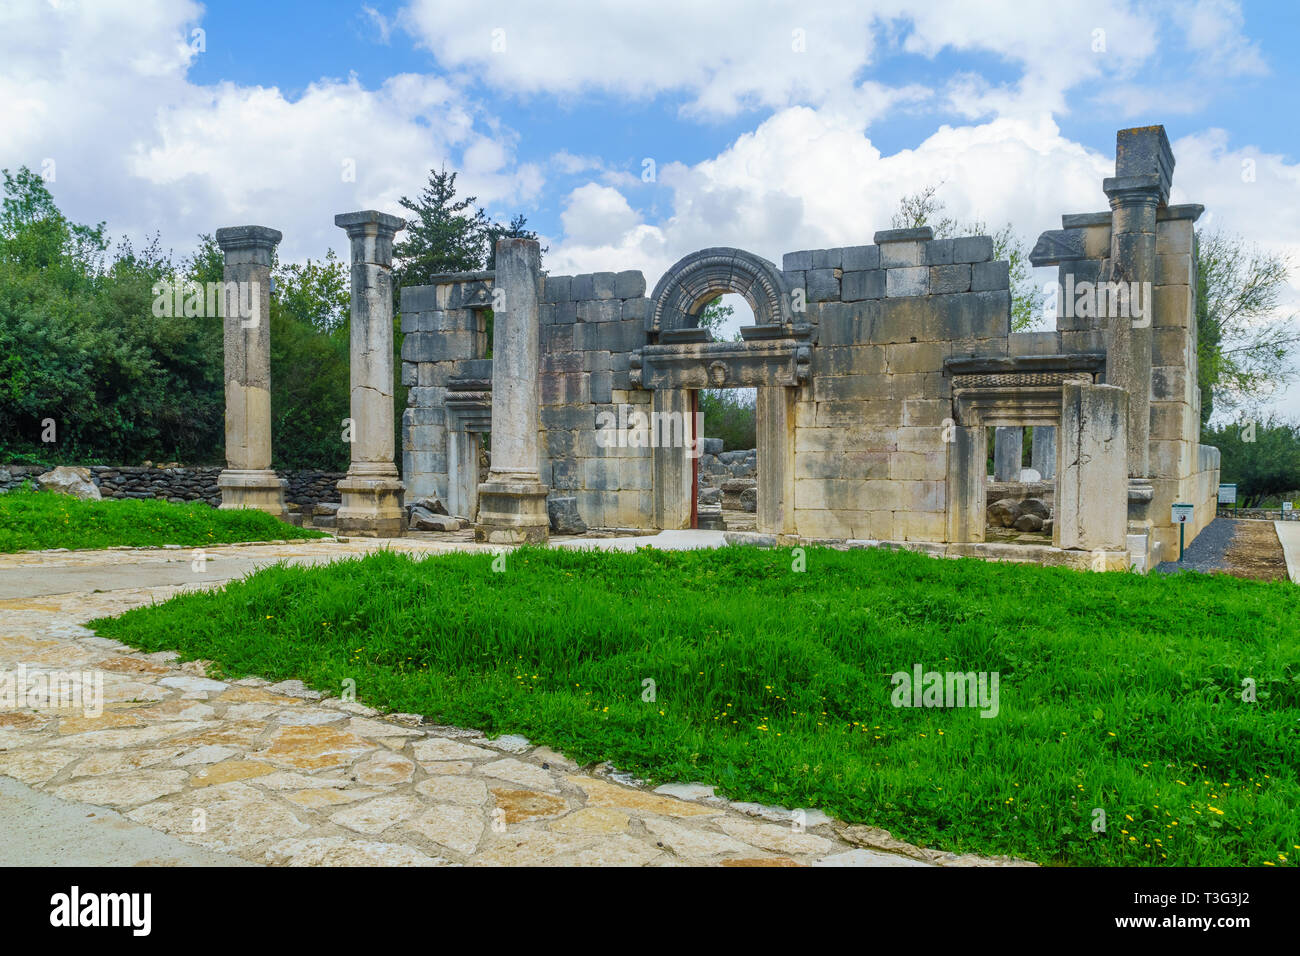 View of the ancient synagogue ruins in Baram, now a National Park. Northern Israel Stock Photo